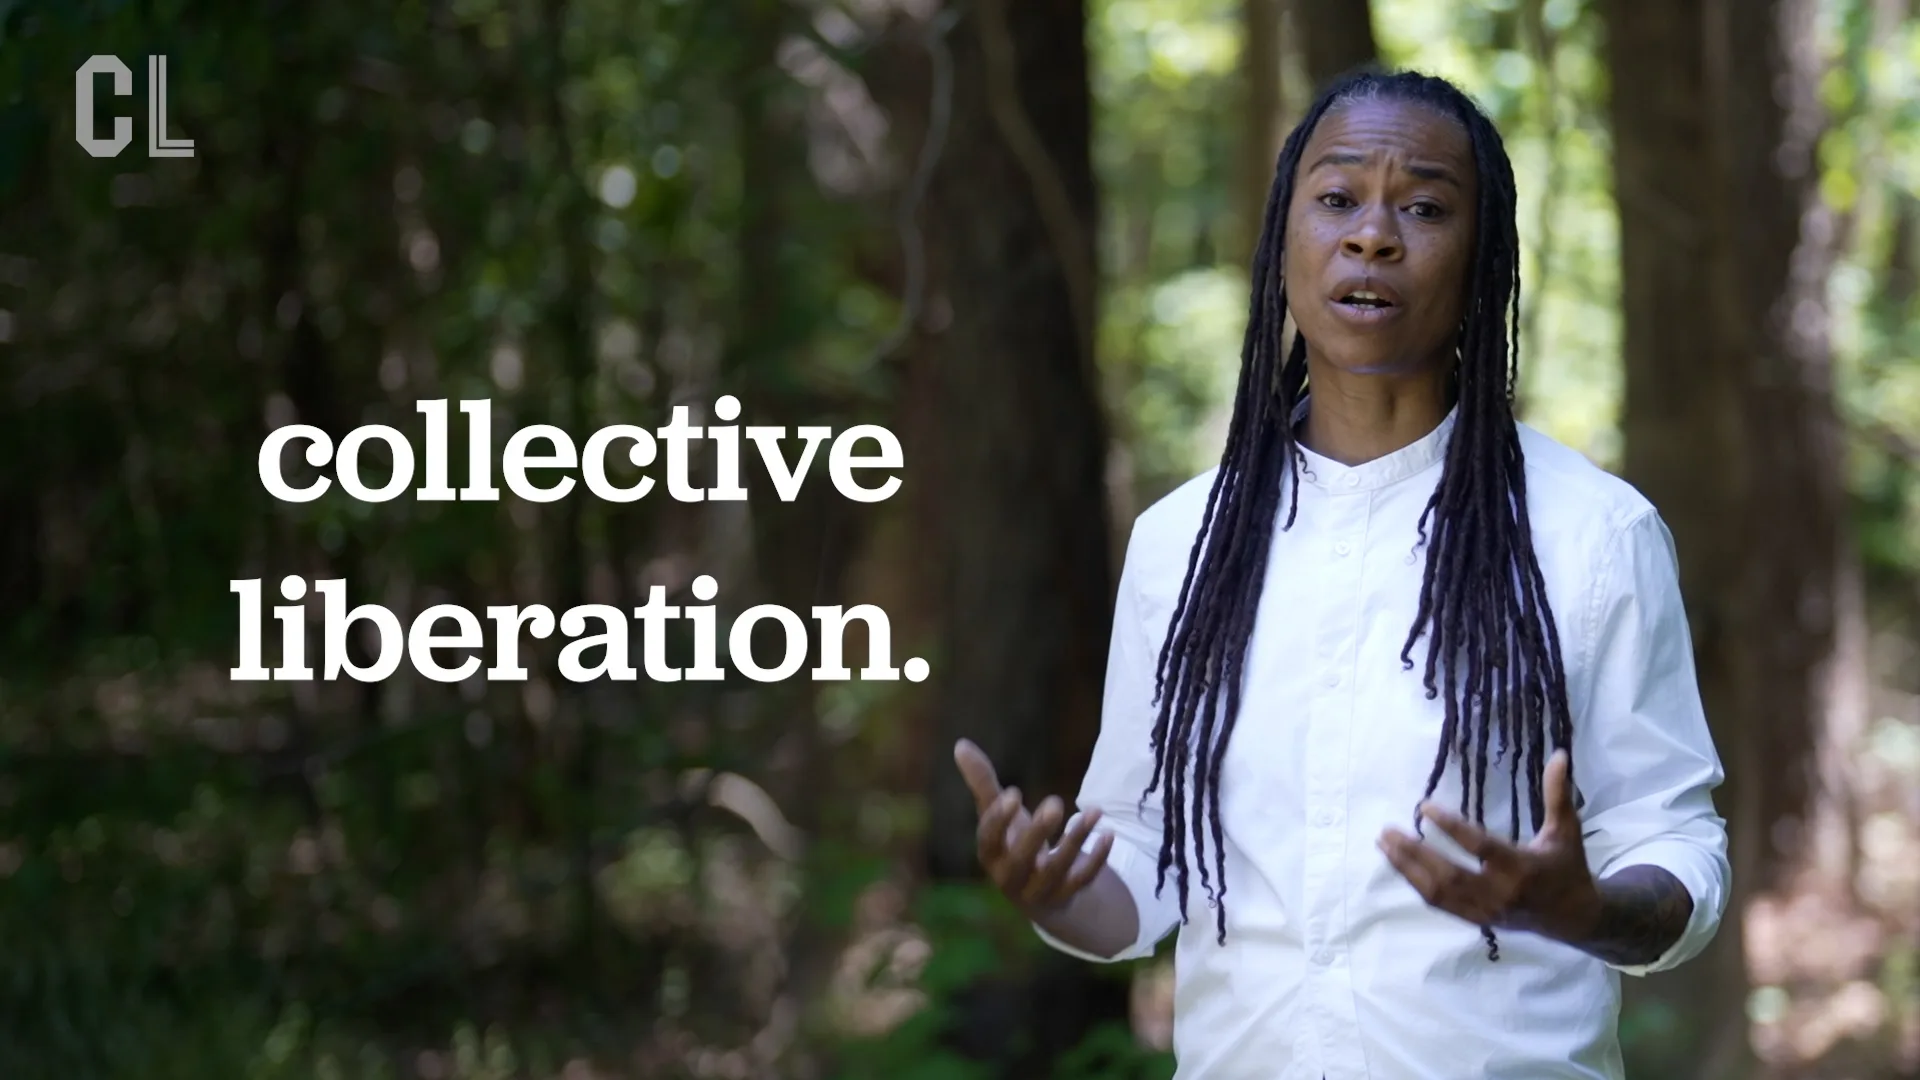 Erica Woodland stands in a forested setting and explains what healing justice is and how it's connected to collective liberation.